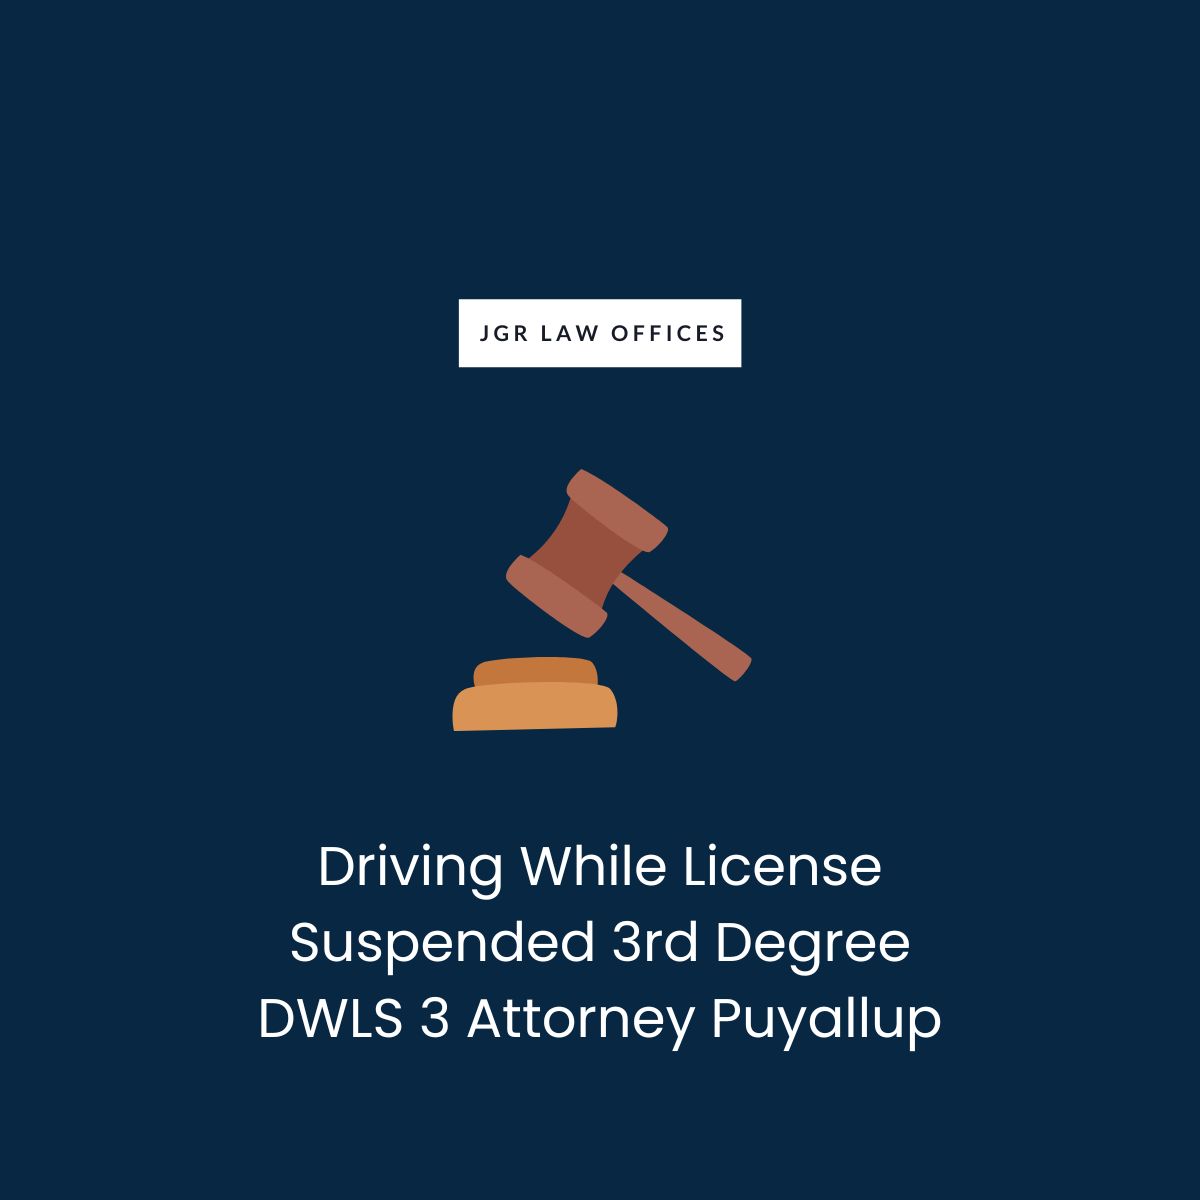 Driving While License Suspended 3rd Degree DWLS 3 Attorney Puyallup